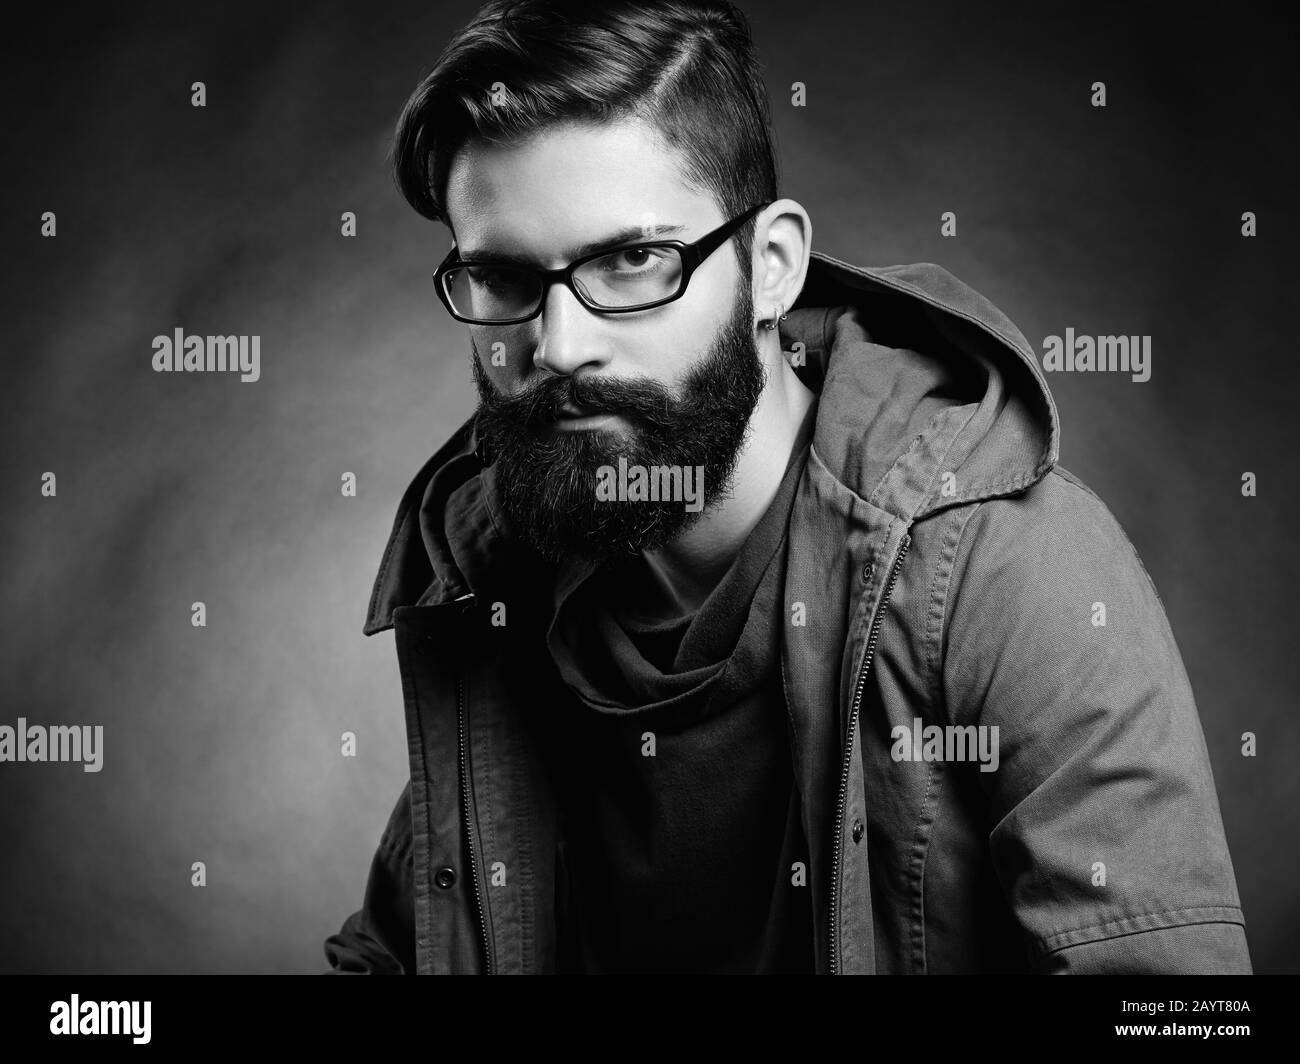 Portrait of handsome man with beard and mustache. Close-up image of serious brutal bearded man on dark background. Man with glasses. Black and white p Stock Photo